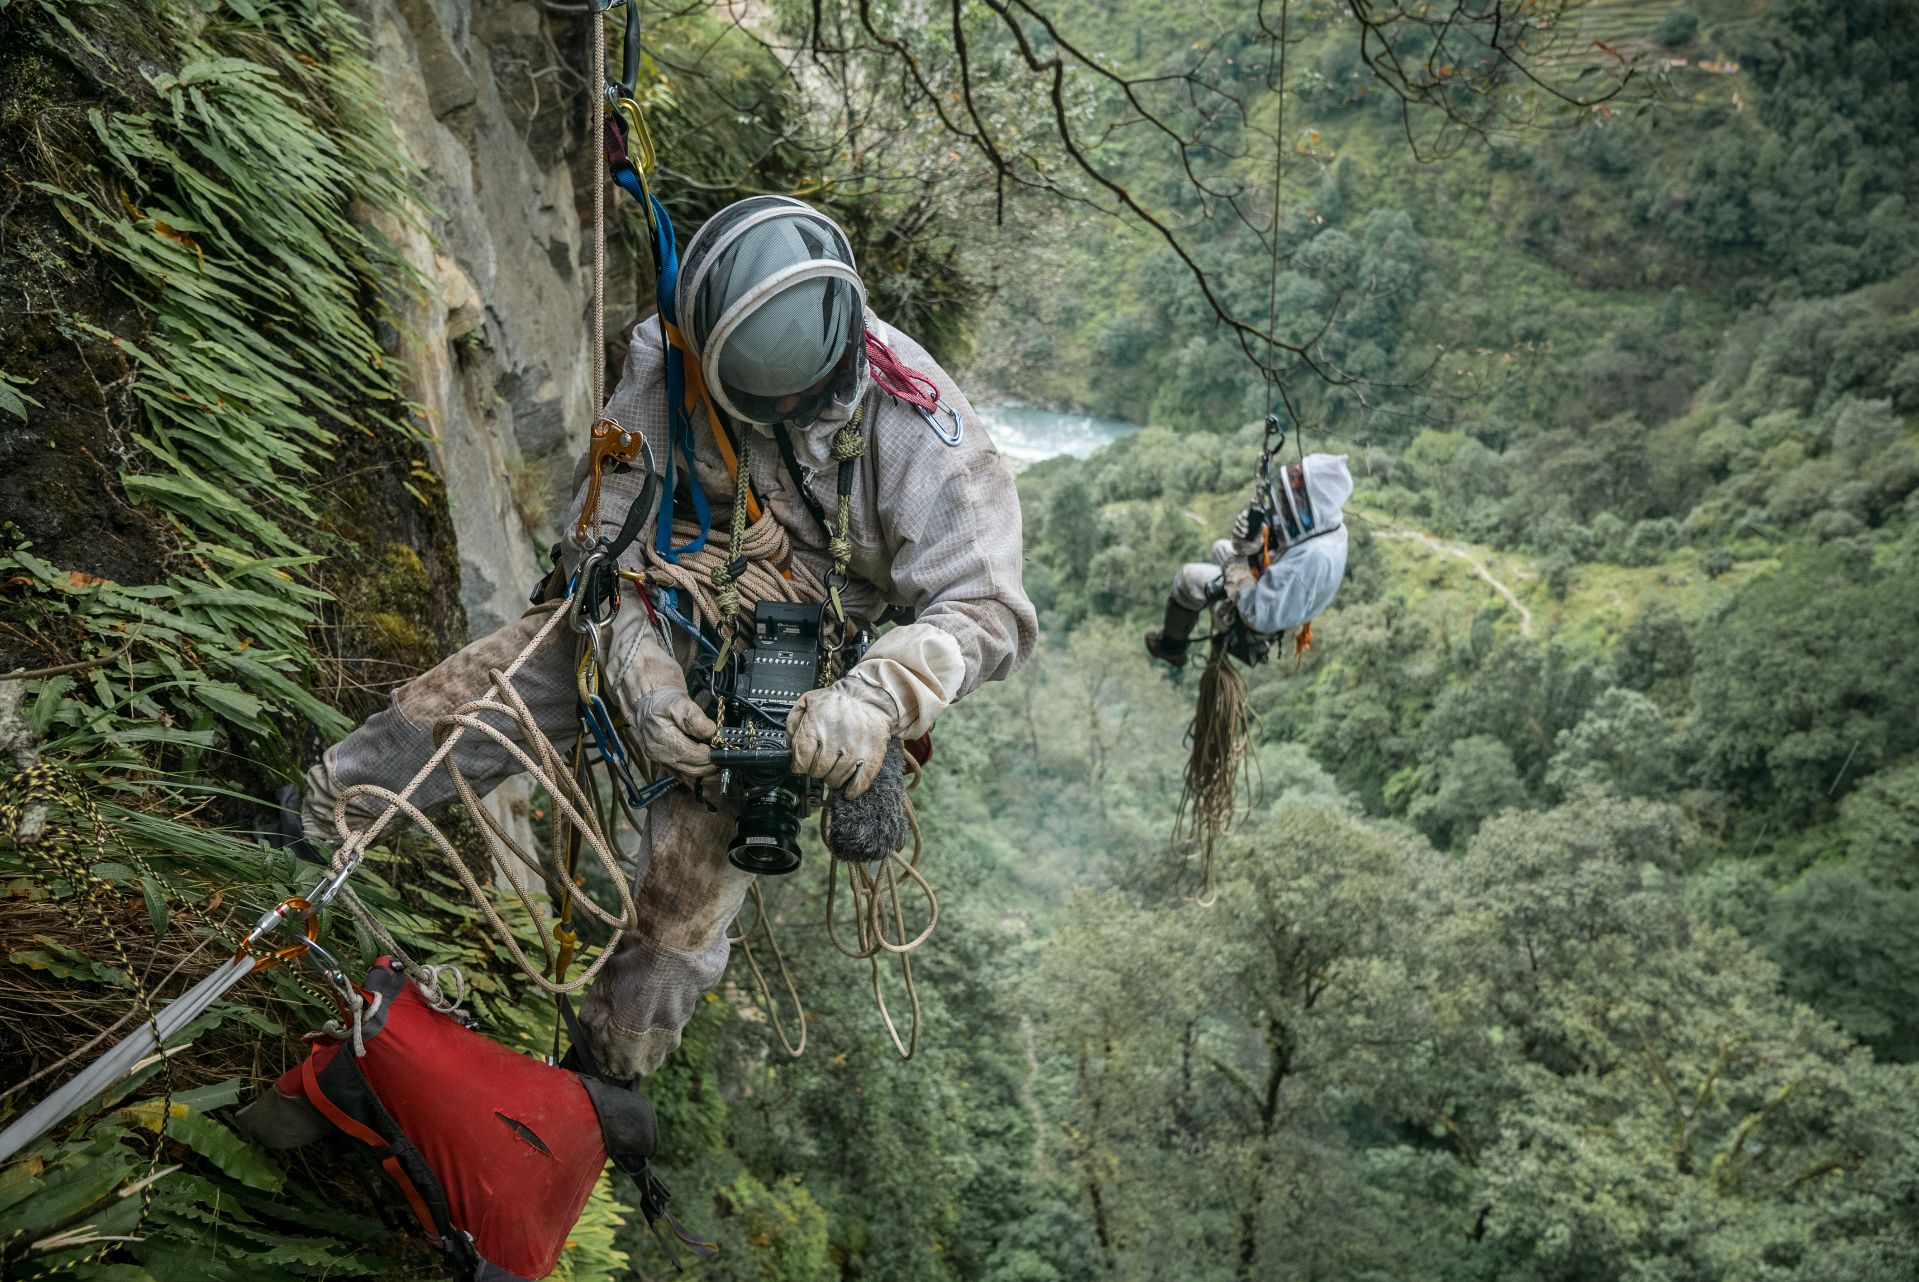 Wearing bee suits, Renan Ozturk and Ben Ayers ’99 prepare to capture Mauli Dhan Rai as he harvests a valuable hallucinogenic honey from a cliffside in Nepal's Hongu River Valley. (Courtesy of Renan Ozturk)